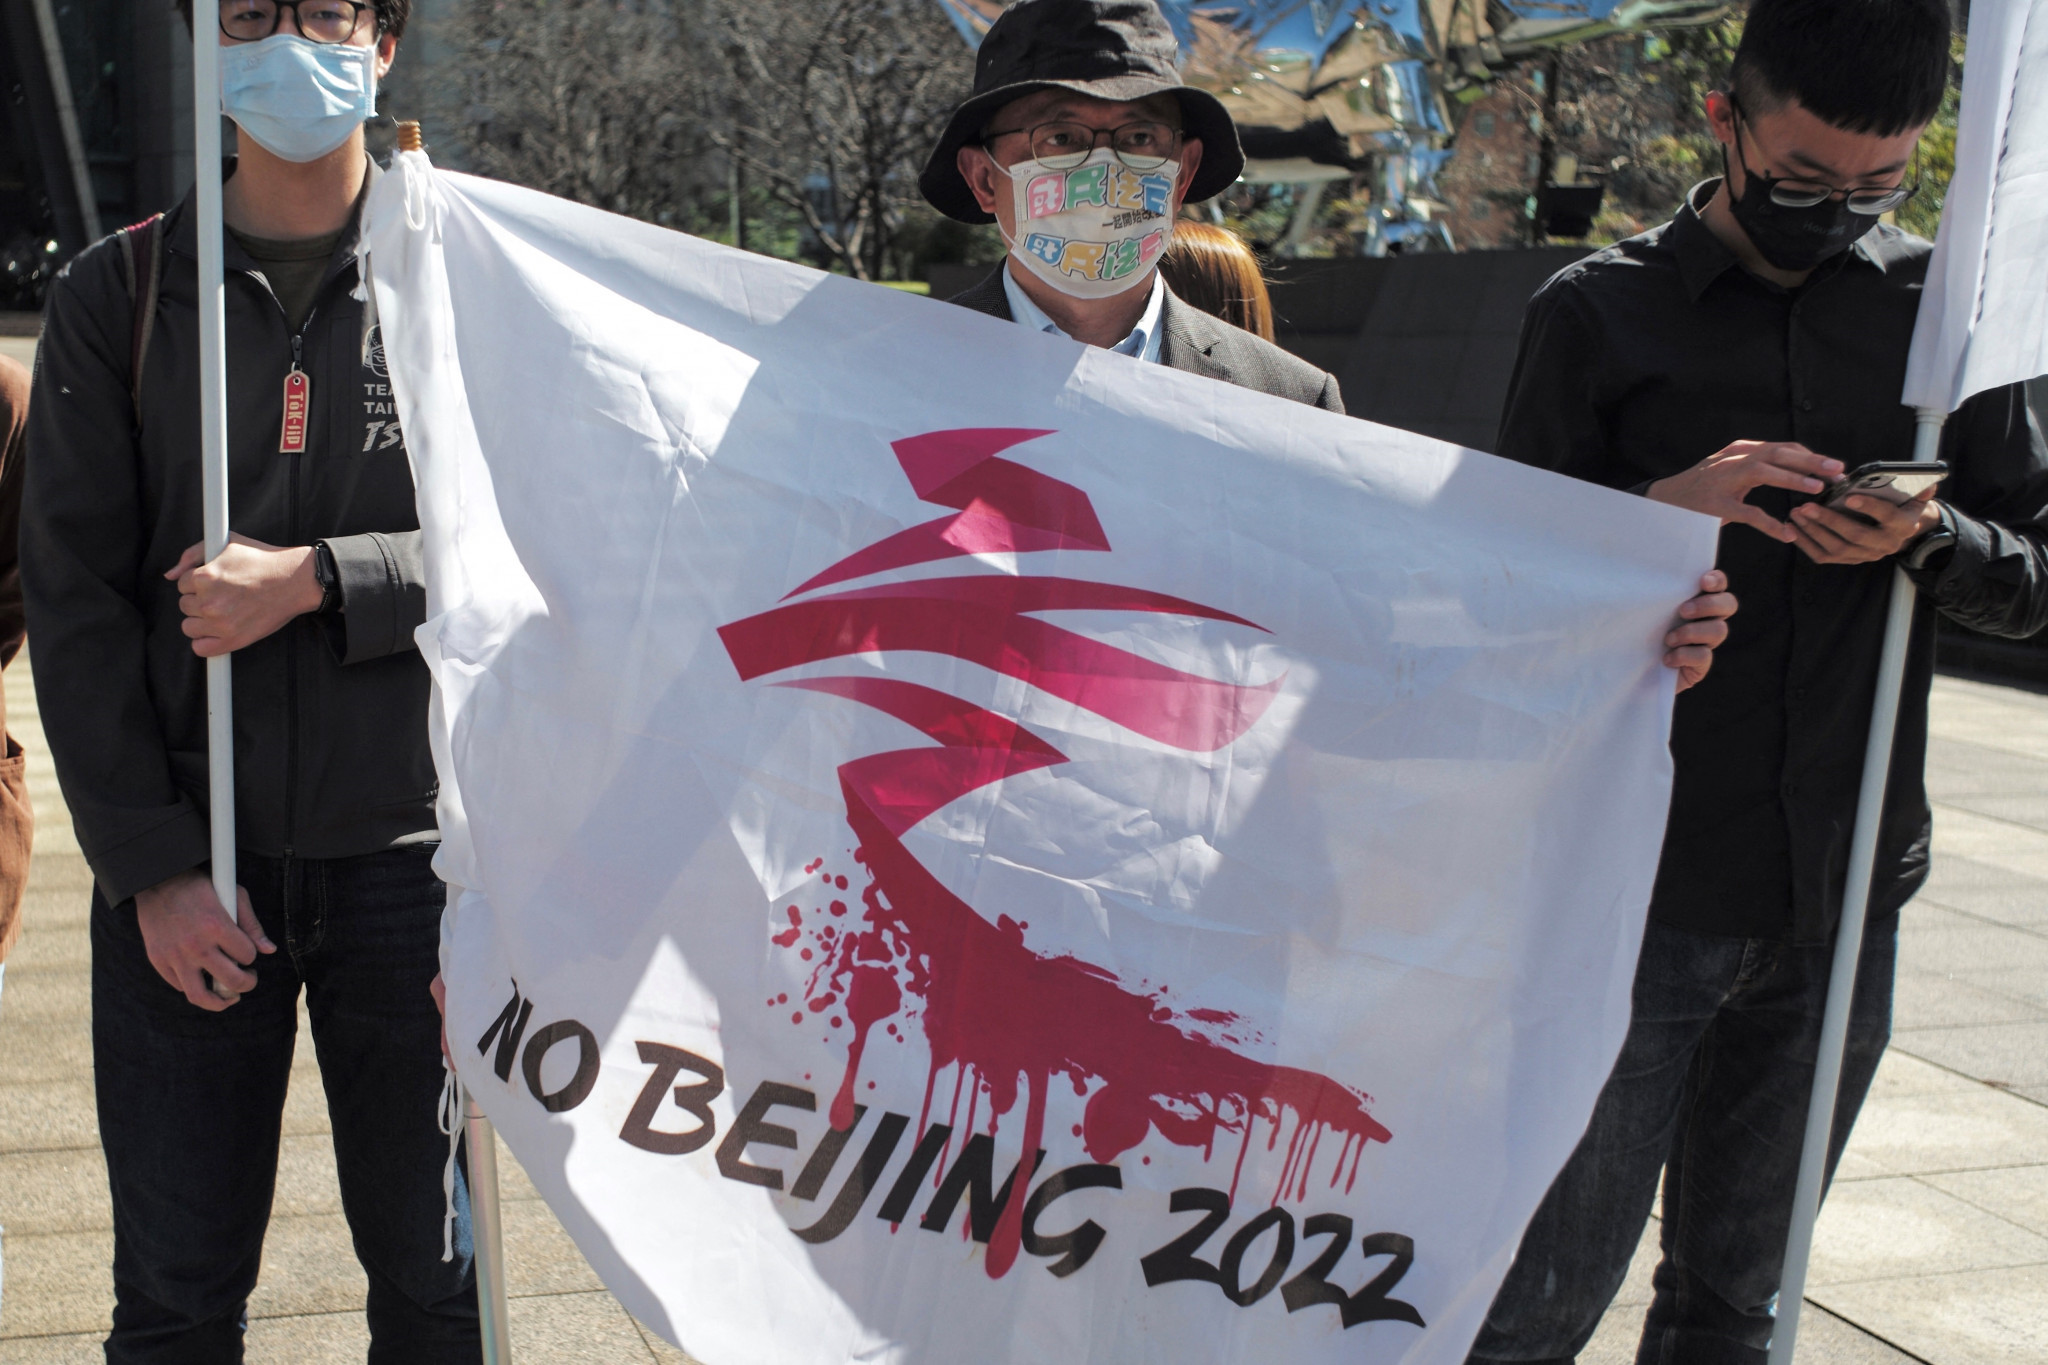 An activist holds a banner to protest against the Winter Olympics in Beijing during a demonstration outside the Bank of China in Taipei ©Getty Images